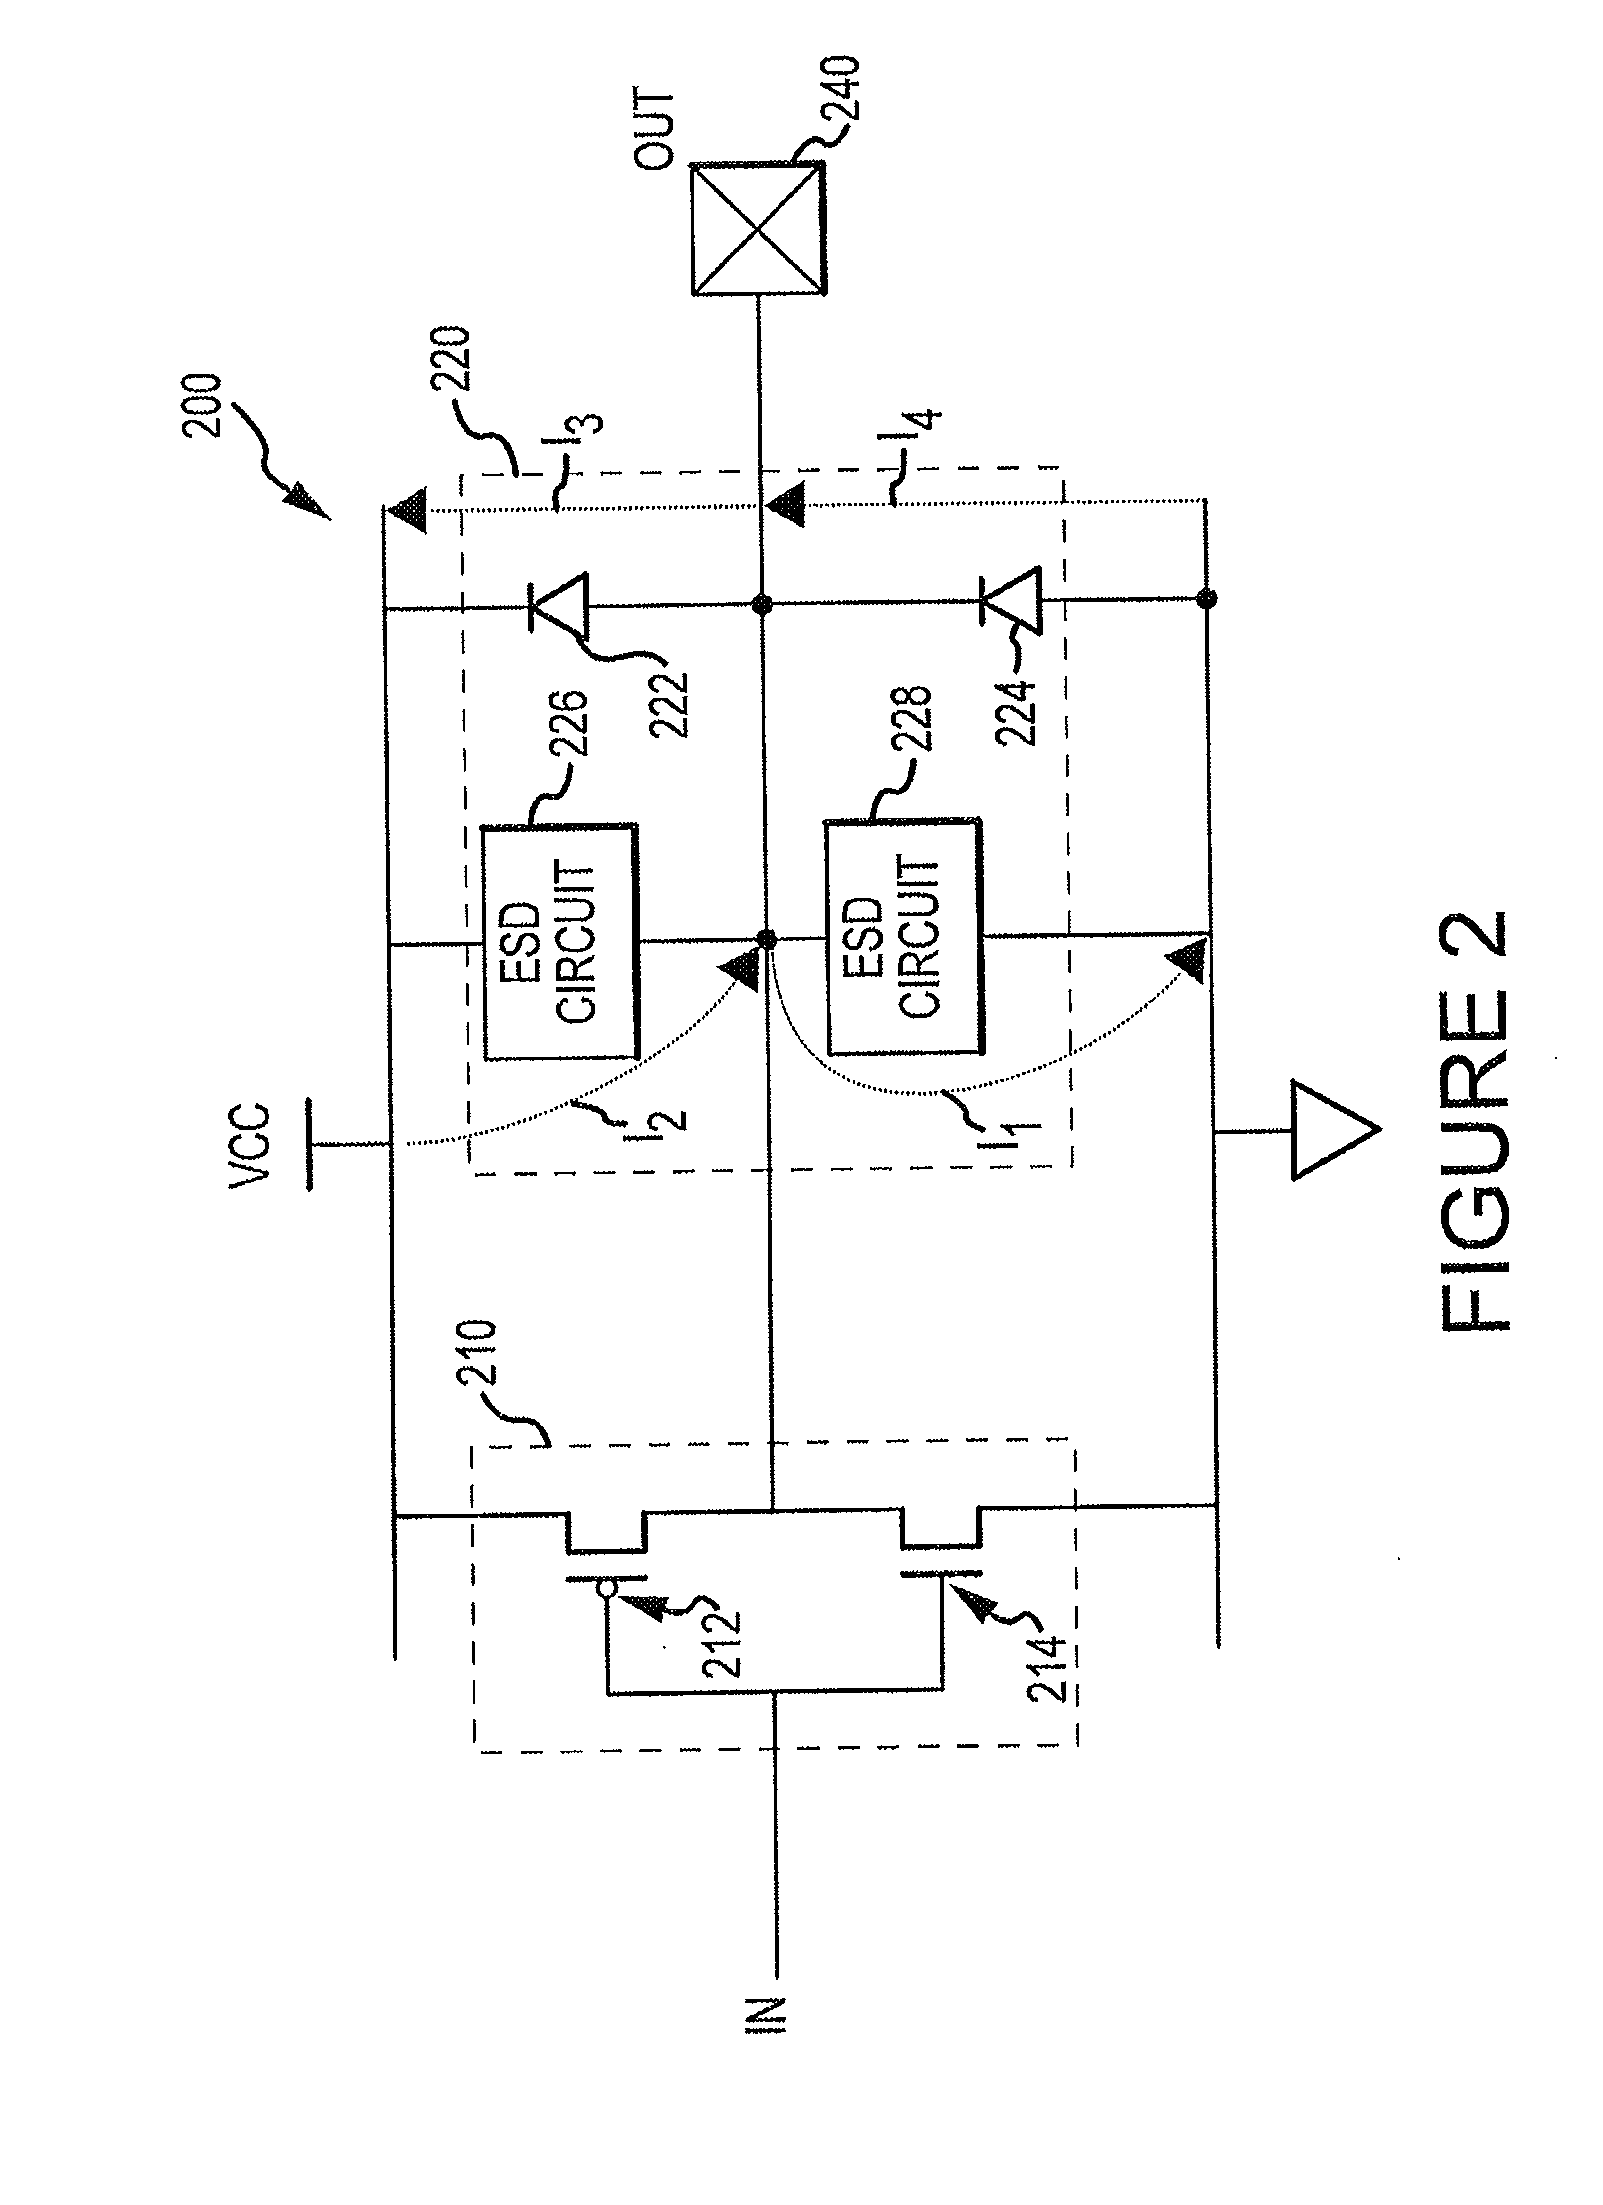 Combination ESD protection circuits and methods